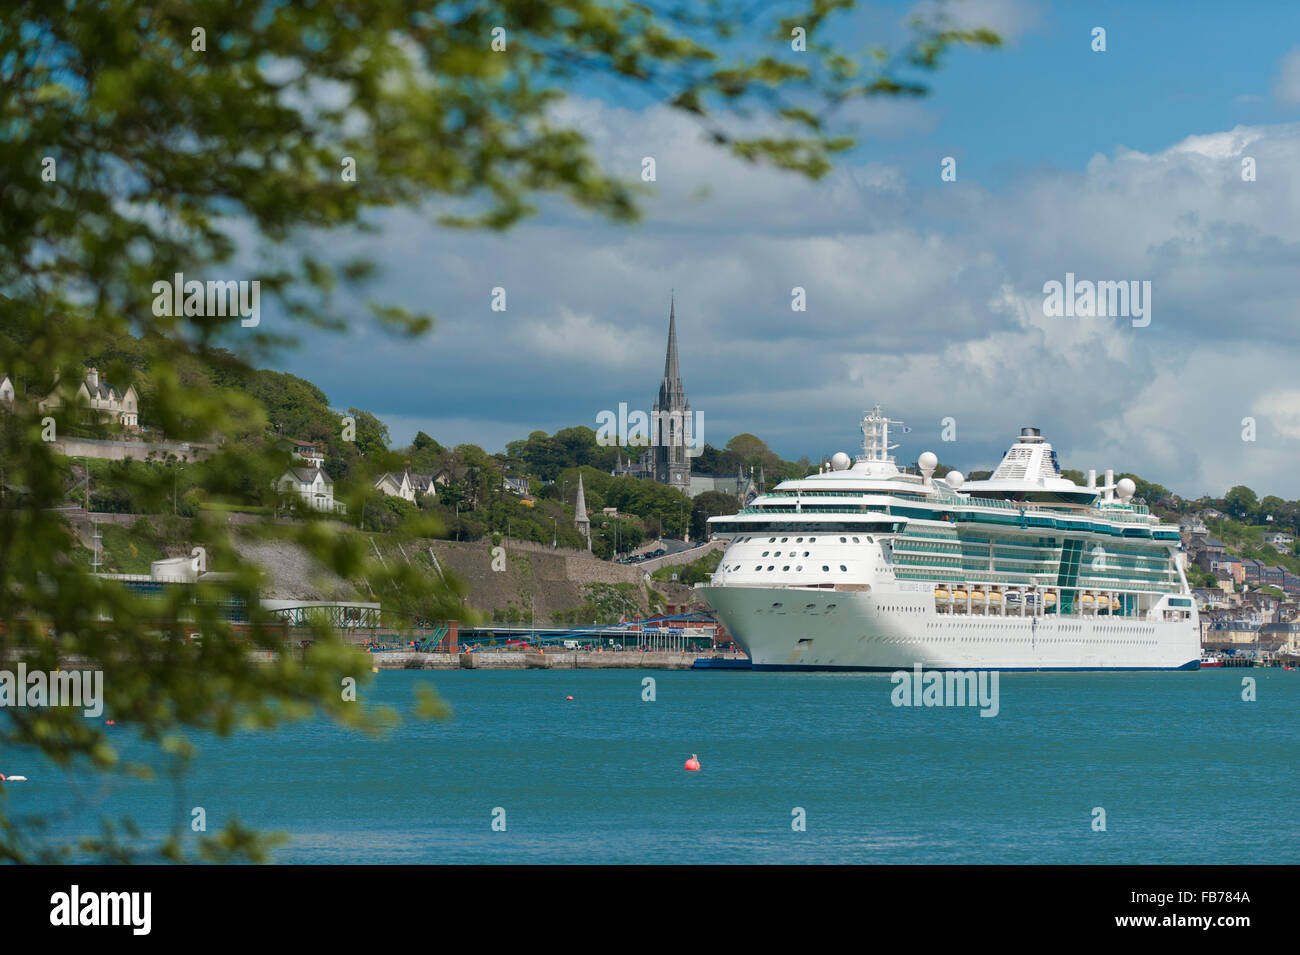 Royal Caribbean's cruise ship 'Brilliance of the Seas' moored in the Cobh Cruise Terminal, Port of Cork, Ireland Stock Photo